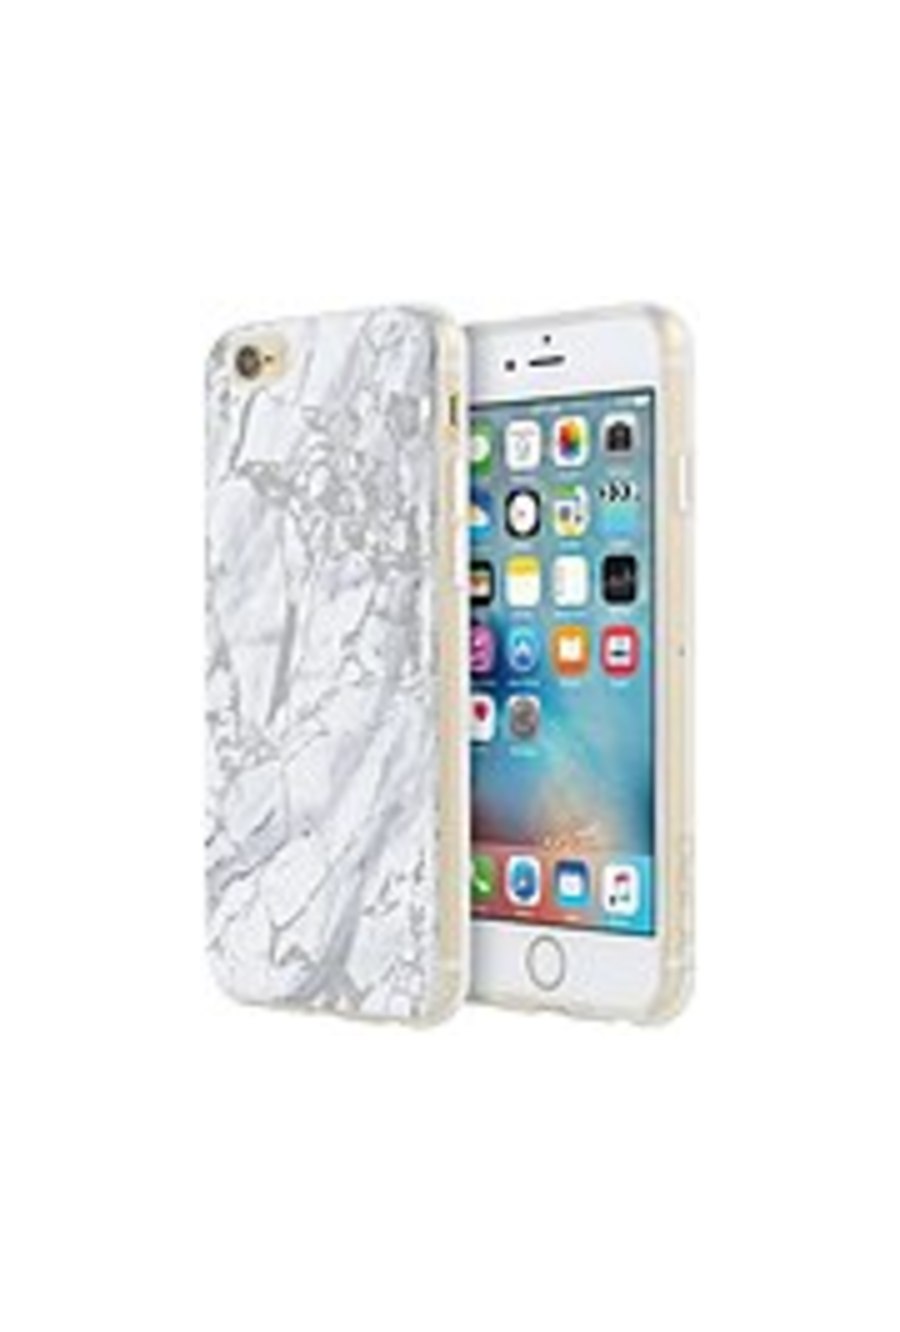 Incipio Marble Design Series for iPhone 6/6S - For iPhone 6, iPhone 6S - Marble - White - Translucent, Metallic - Wear Resistant, Scratch Resistant, T